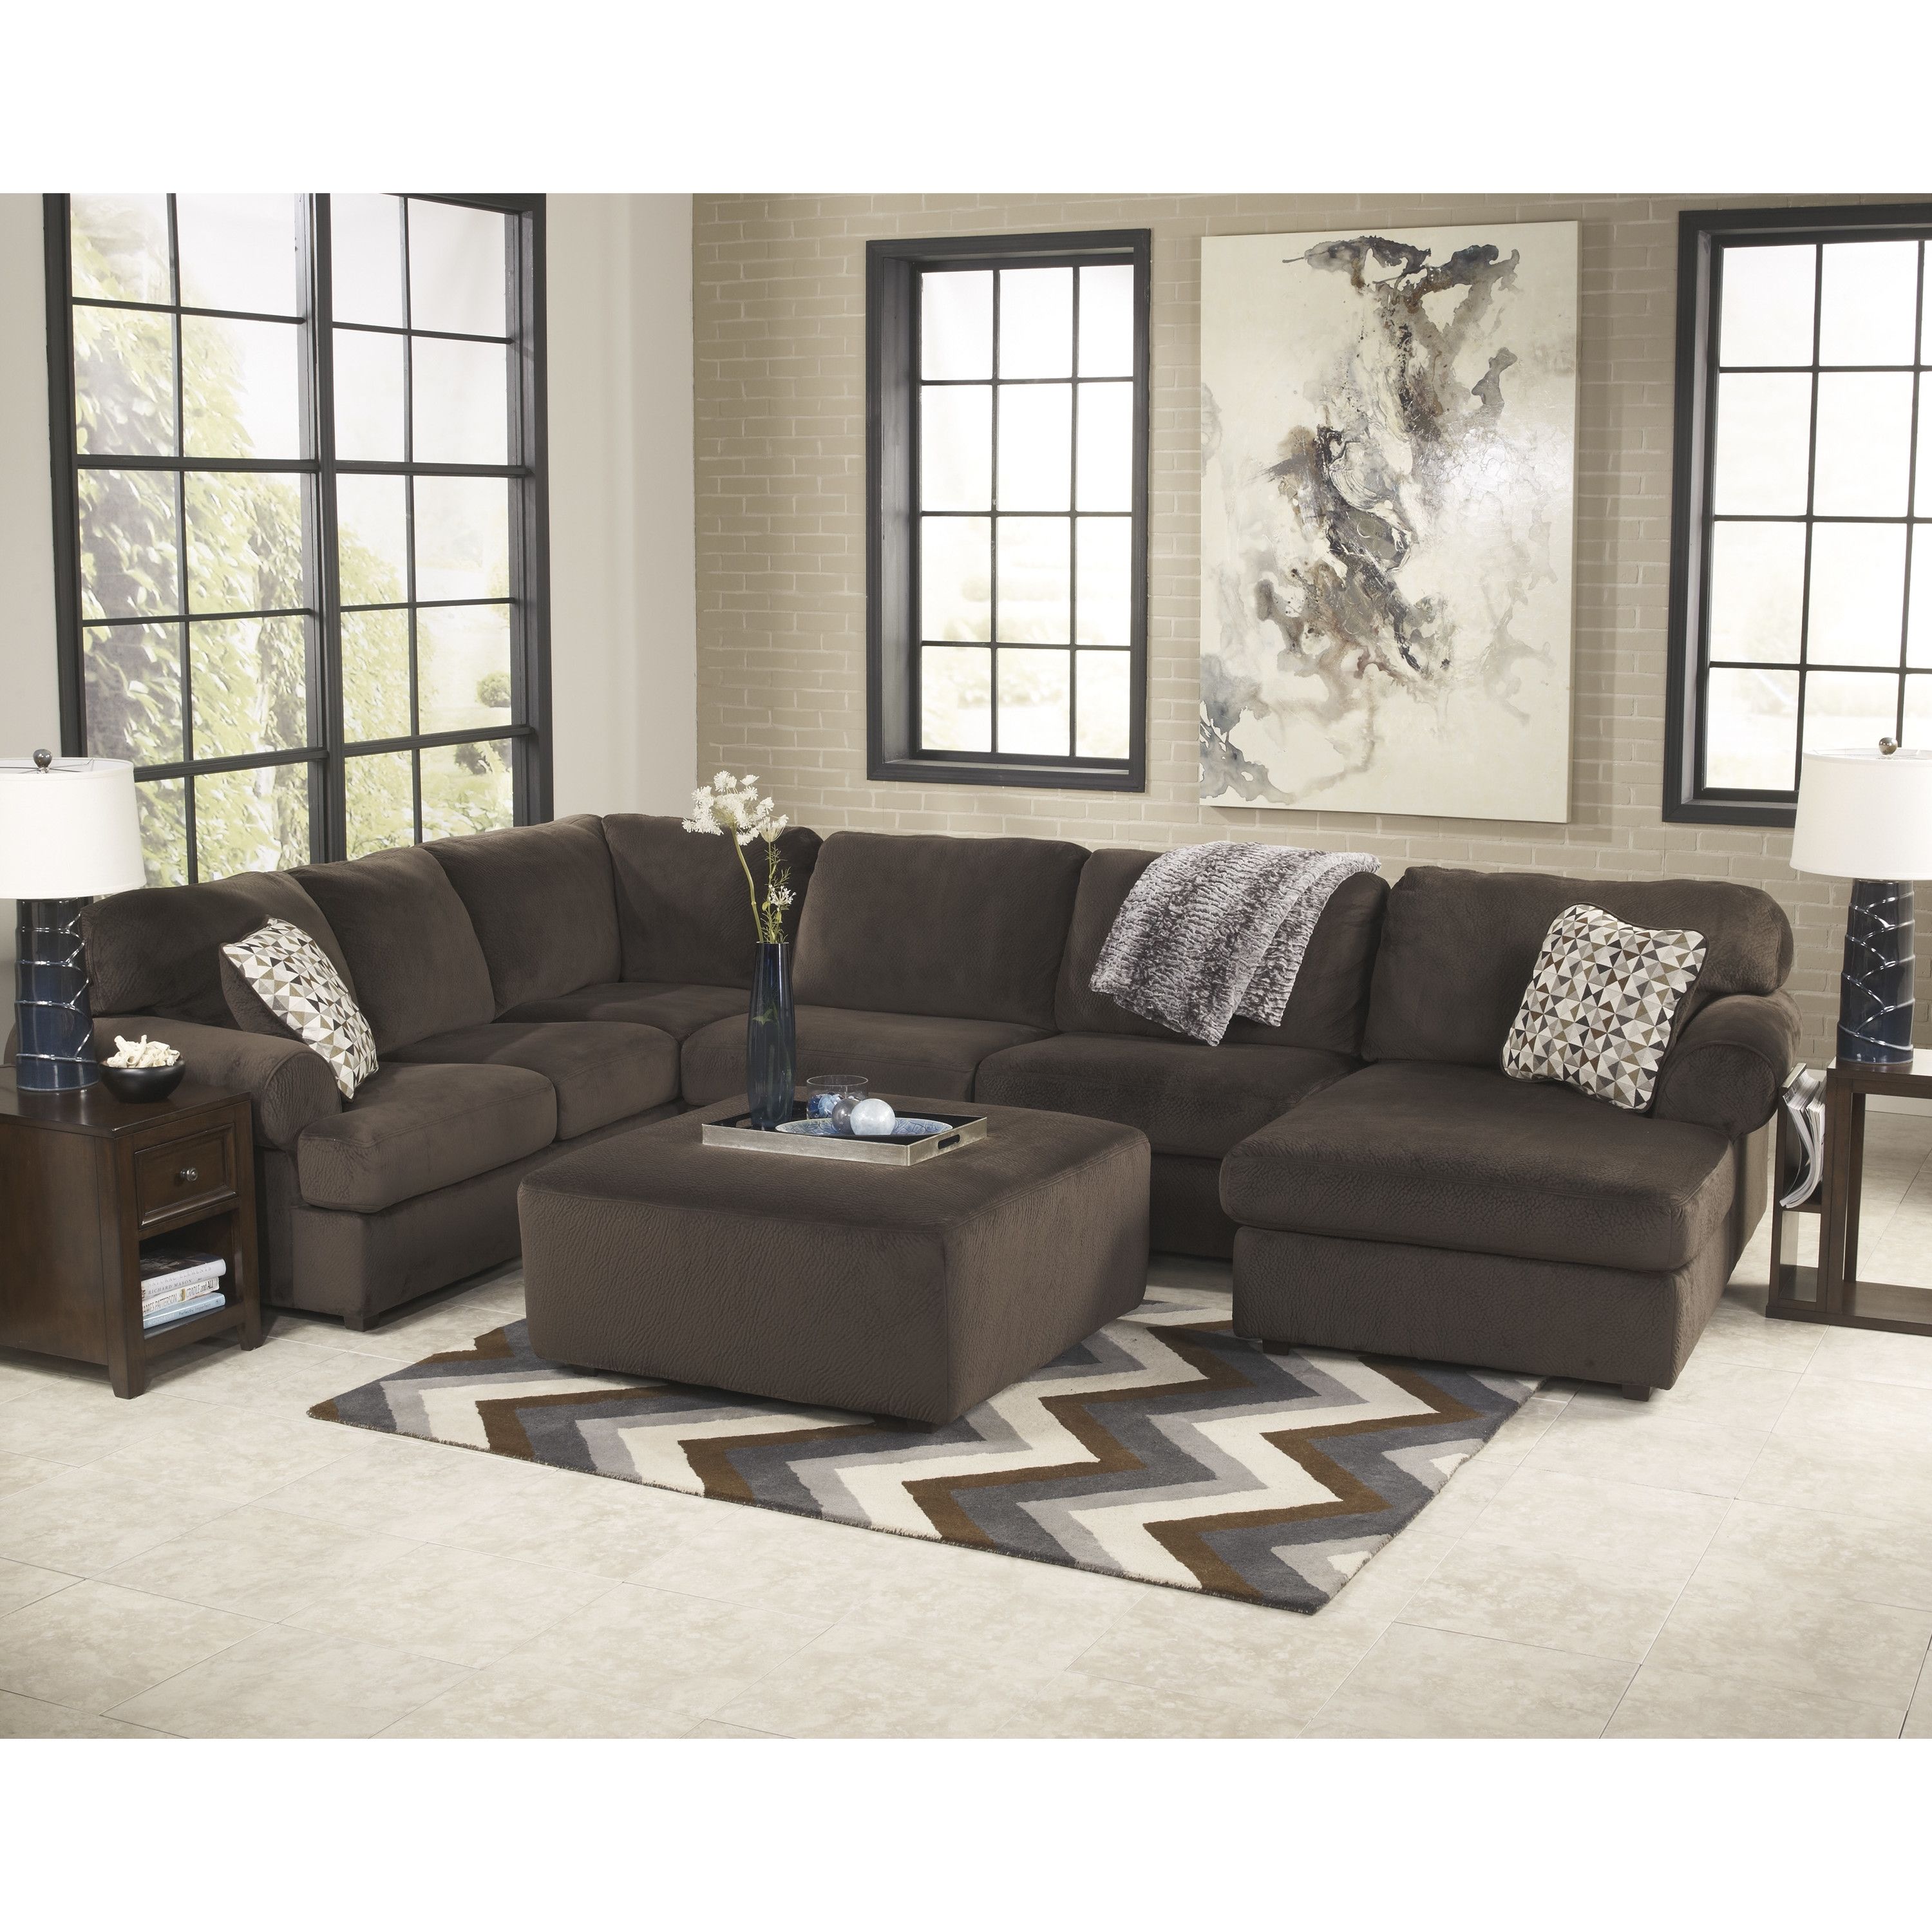 Free Wayfair Sectionals Furniture Using Pretty Cheap Sectional Intended For Newest Cheap Sectionals With Ottoman (View 14 of 15)